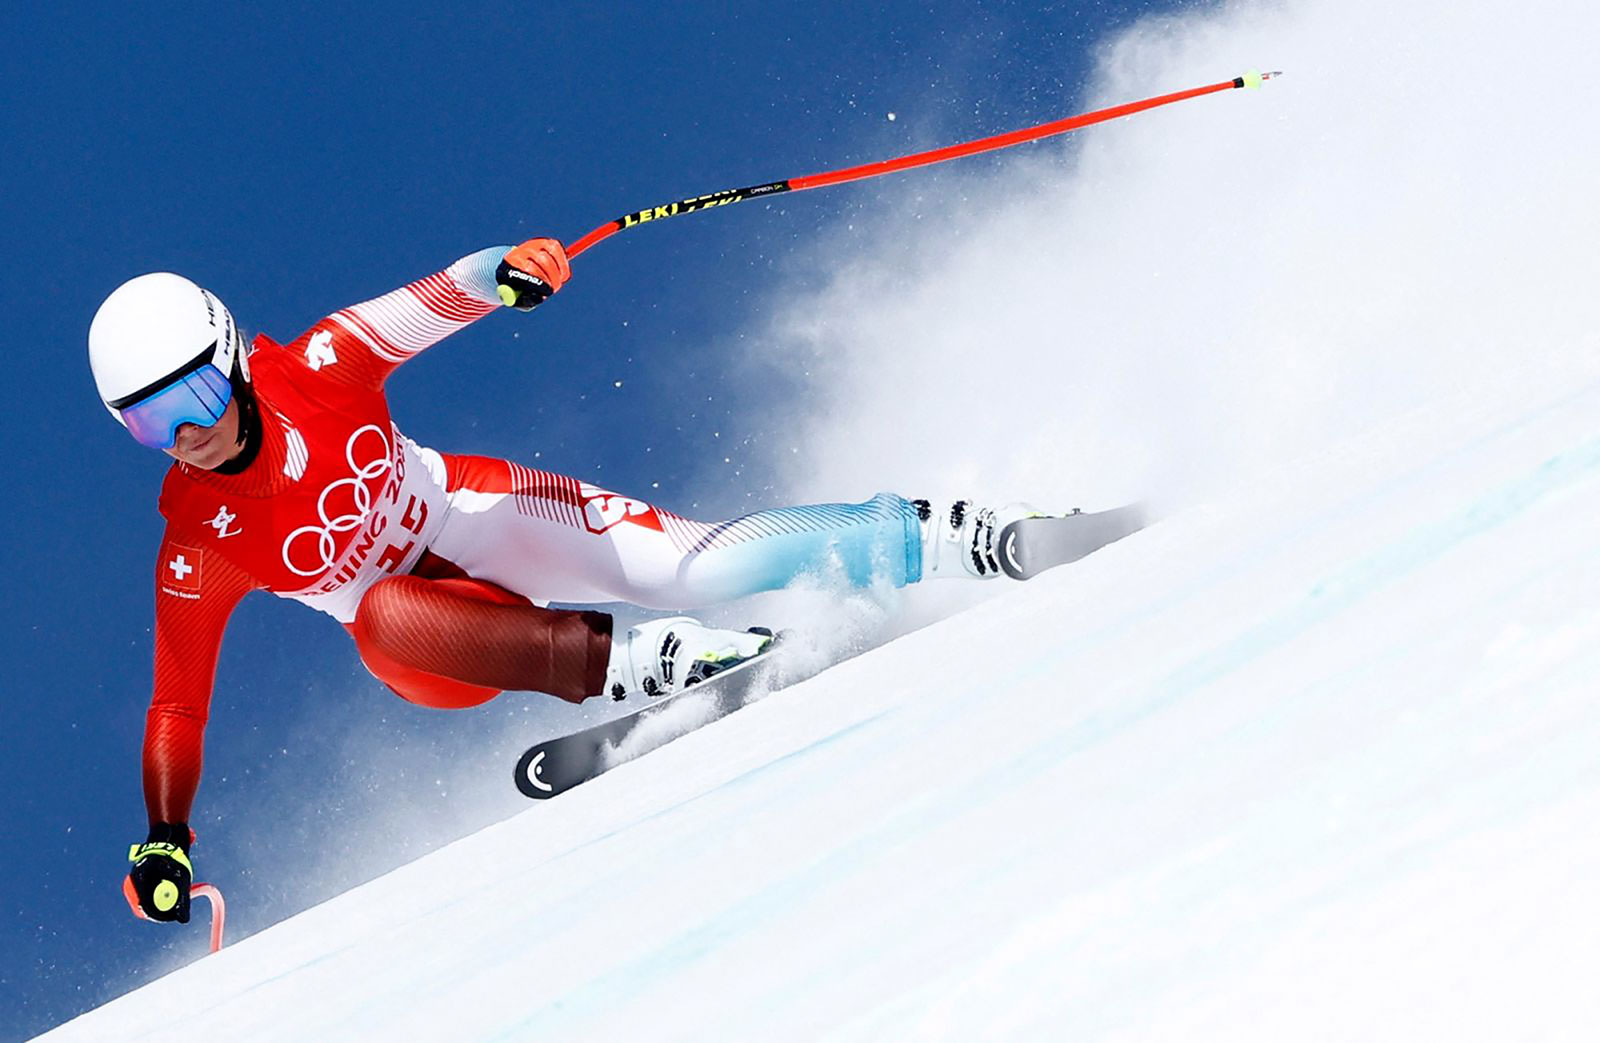 Switzerland's Corinne Suter skis in the downhill event on February 15. She won gold.